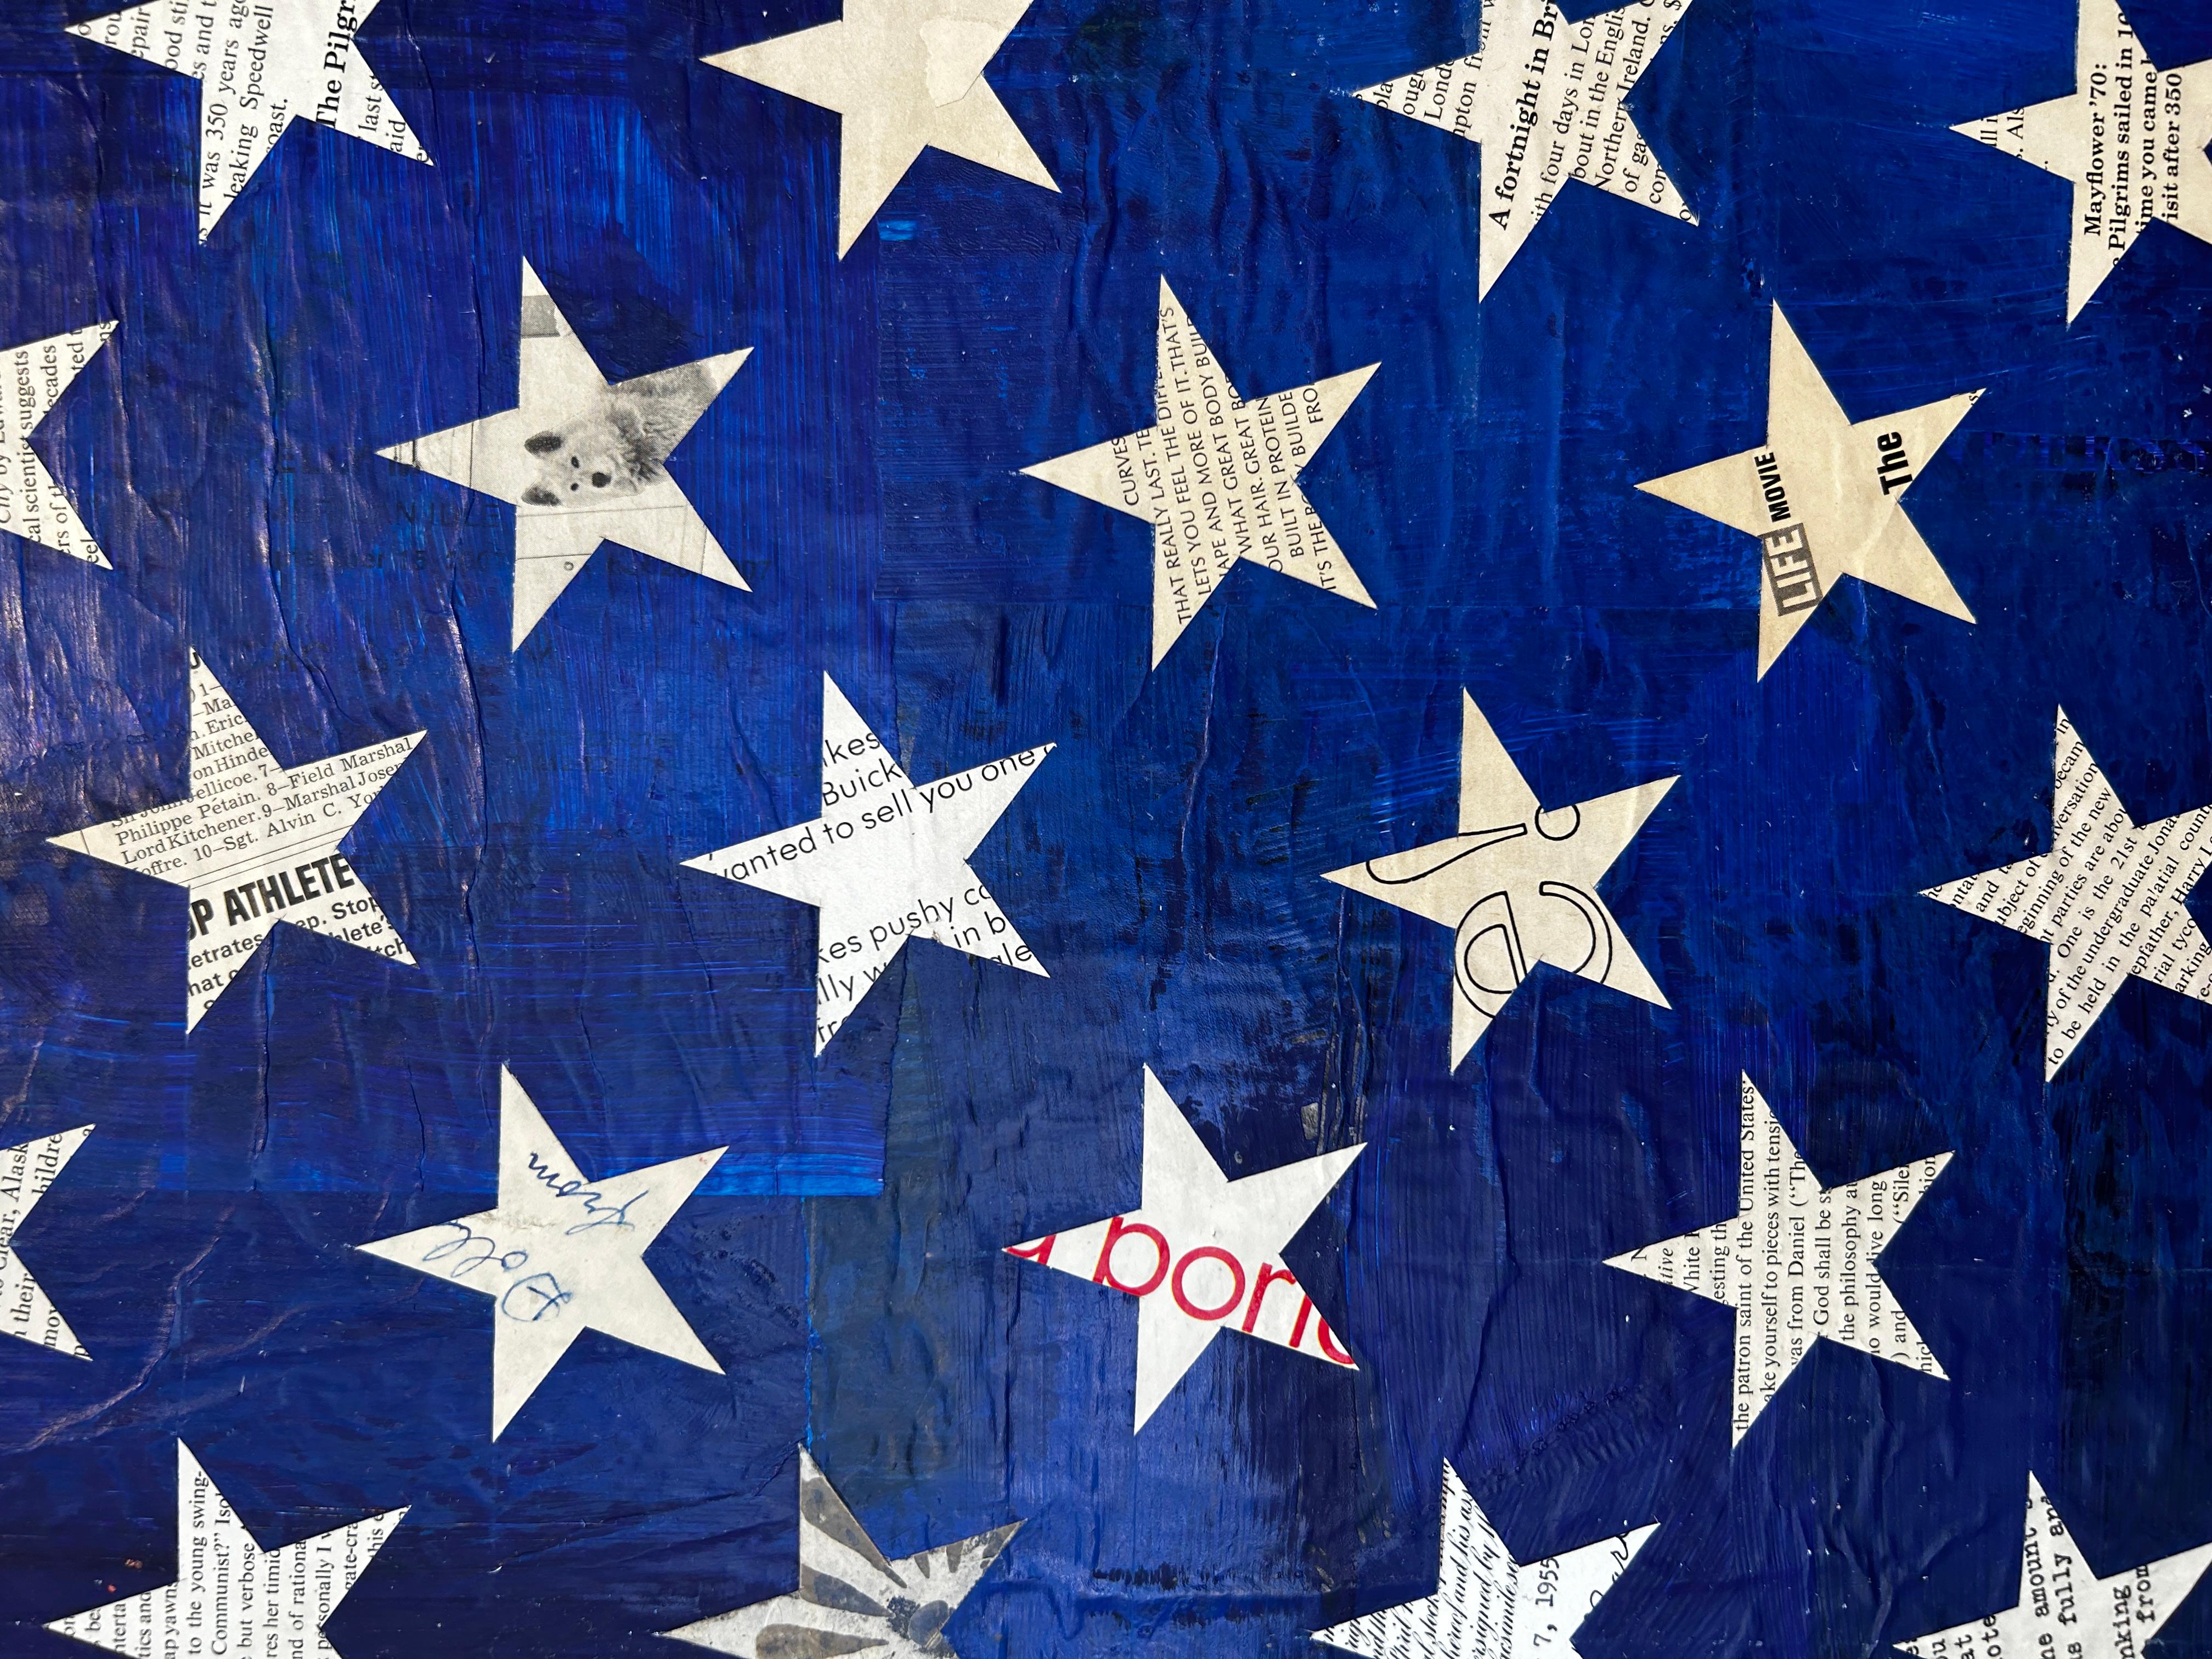 Cey Adams (b. 1962)
American Flag (1961), 2024
Mixed media collage on panel
72 x 36 x 4 in